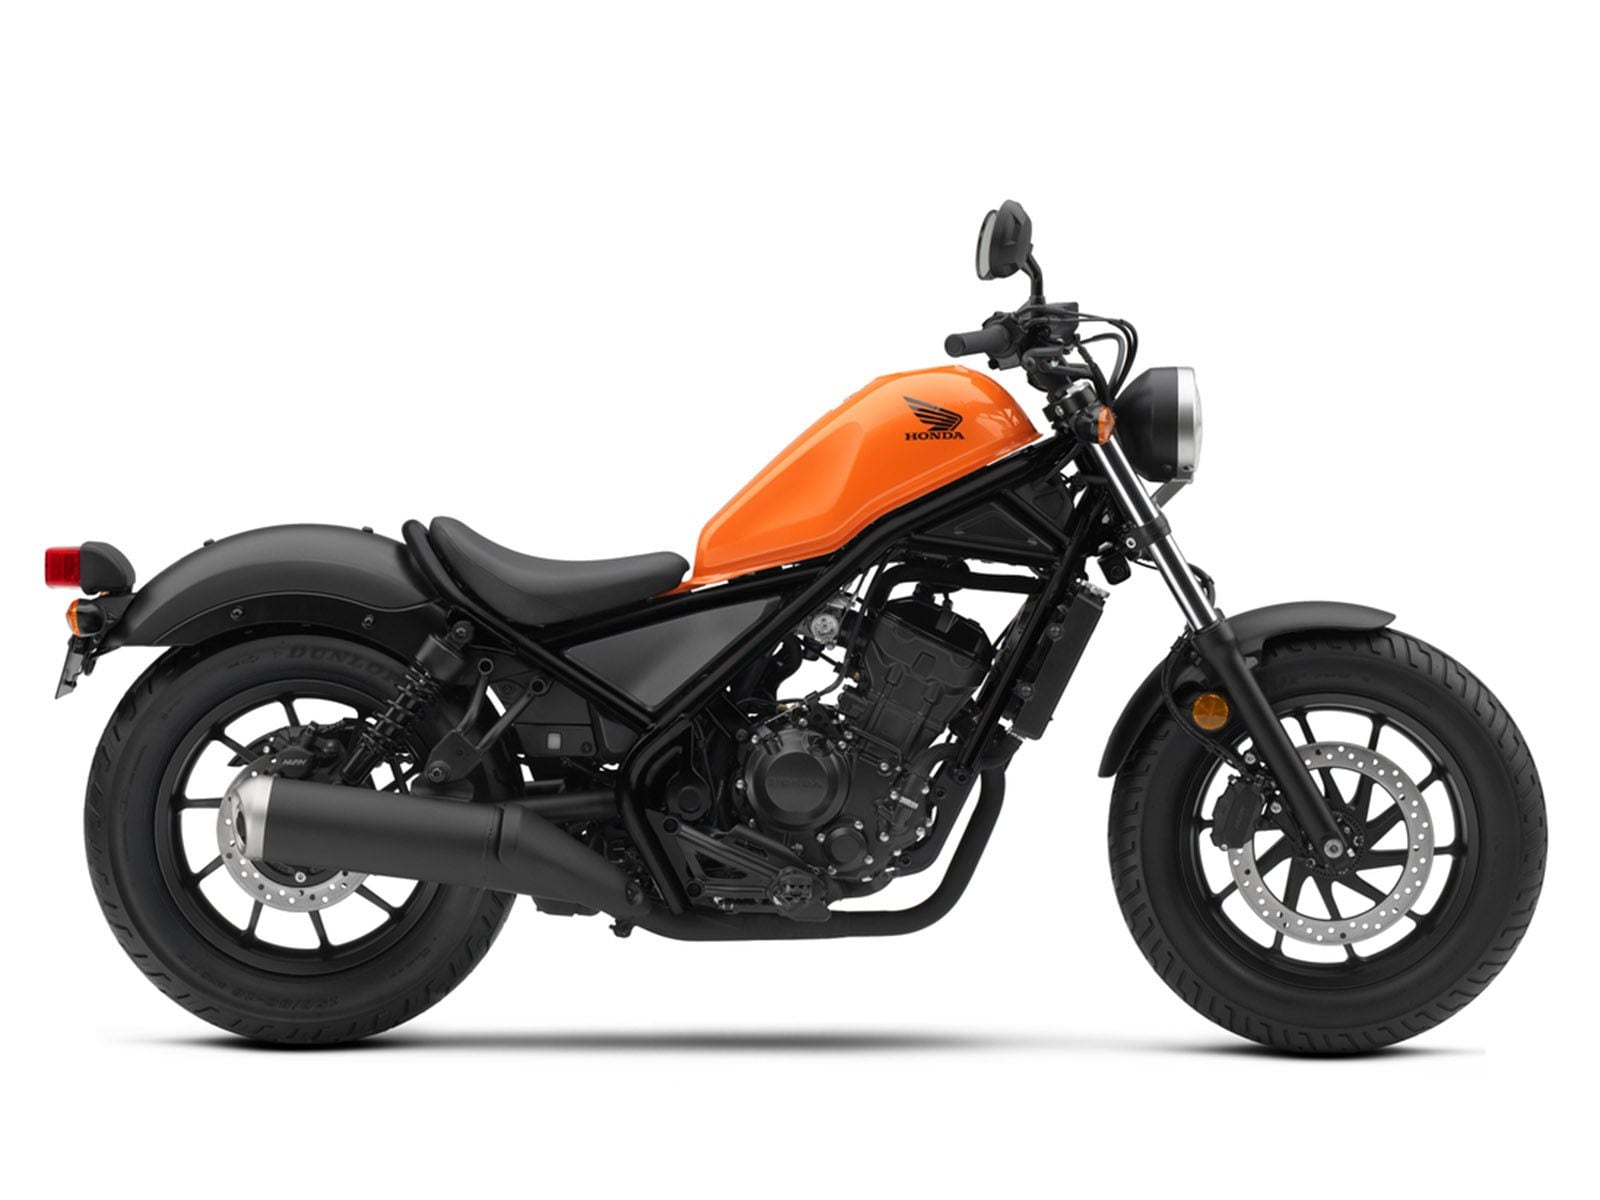 Honda's Rebel is available in 300cc and 500cc displacements.